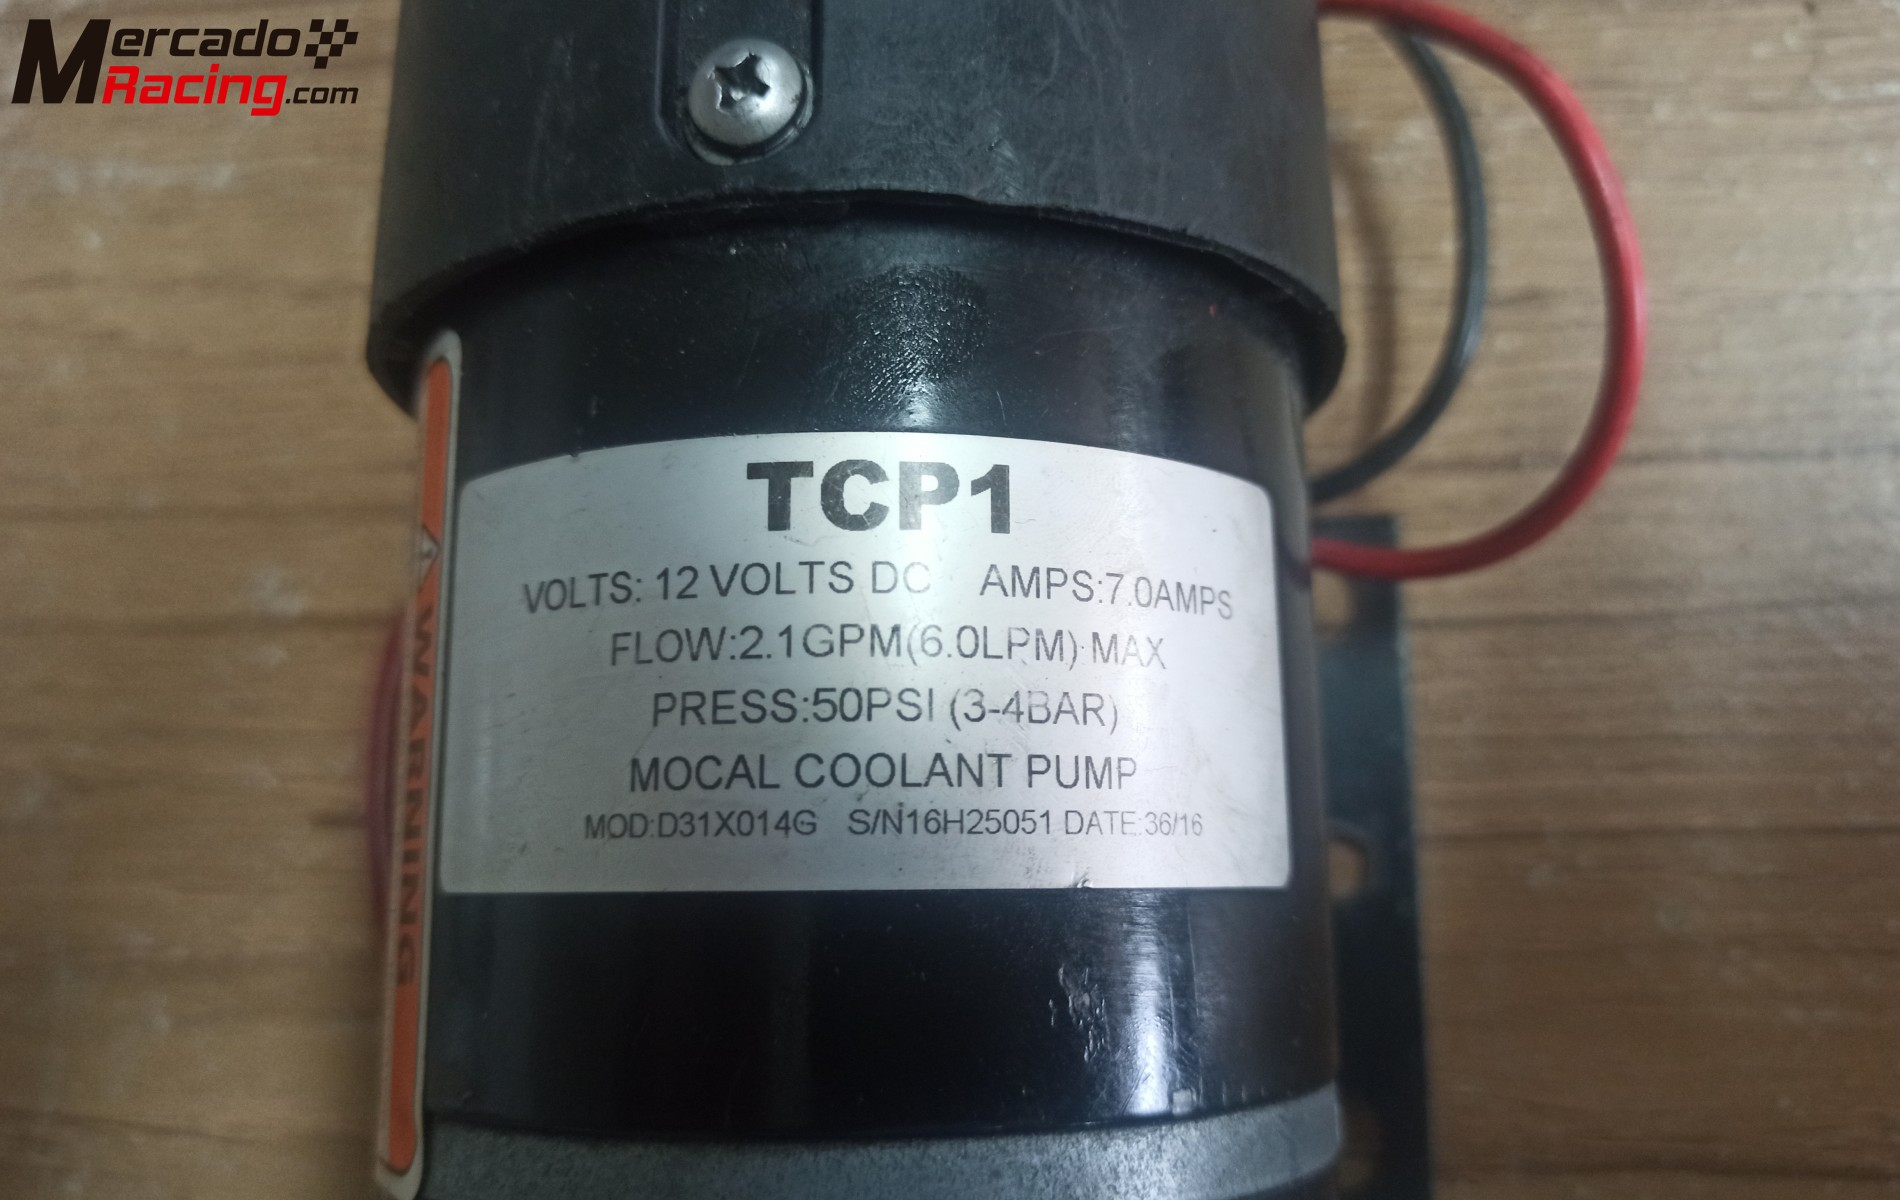 Bomba electrica aceite mocal tcp1